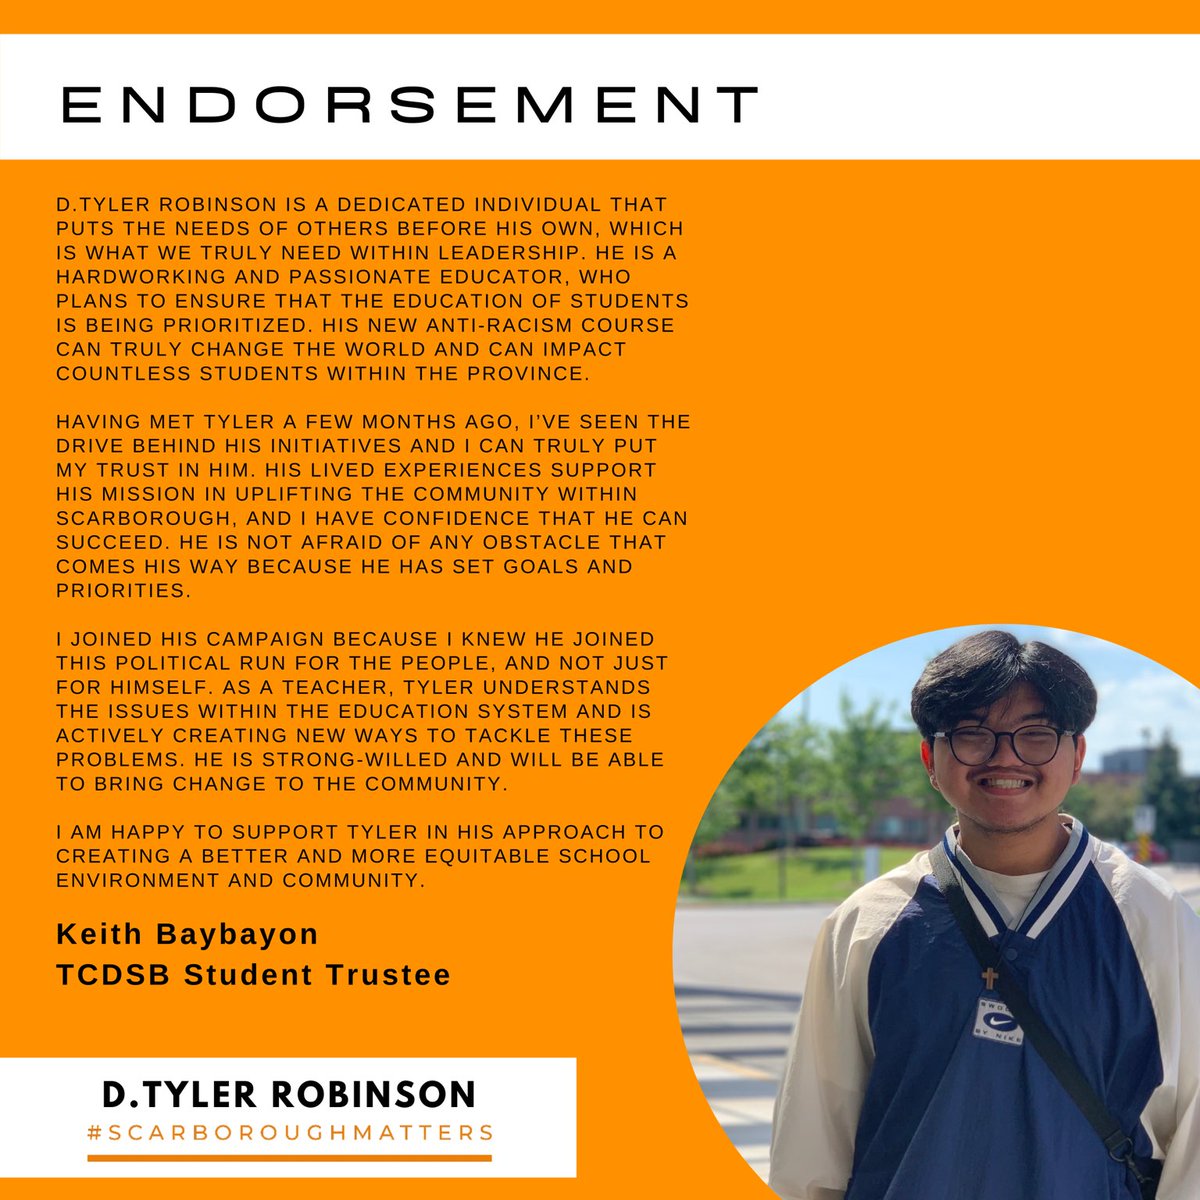 Young ppl are amazing; Keith Baybayon, Student Trustee, TCDSB, is evidence of this.

As we continue to pursue the @OntarioNDP Nomination for @ScarbCentreNDP, the support of brilliant, young, educational stakeholders in Scarborough is crucial. 

TY, Keith🙏🏾

#ScarboroughMatters